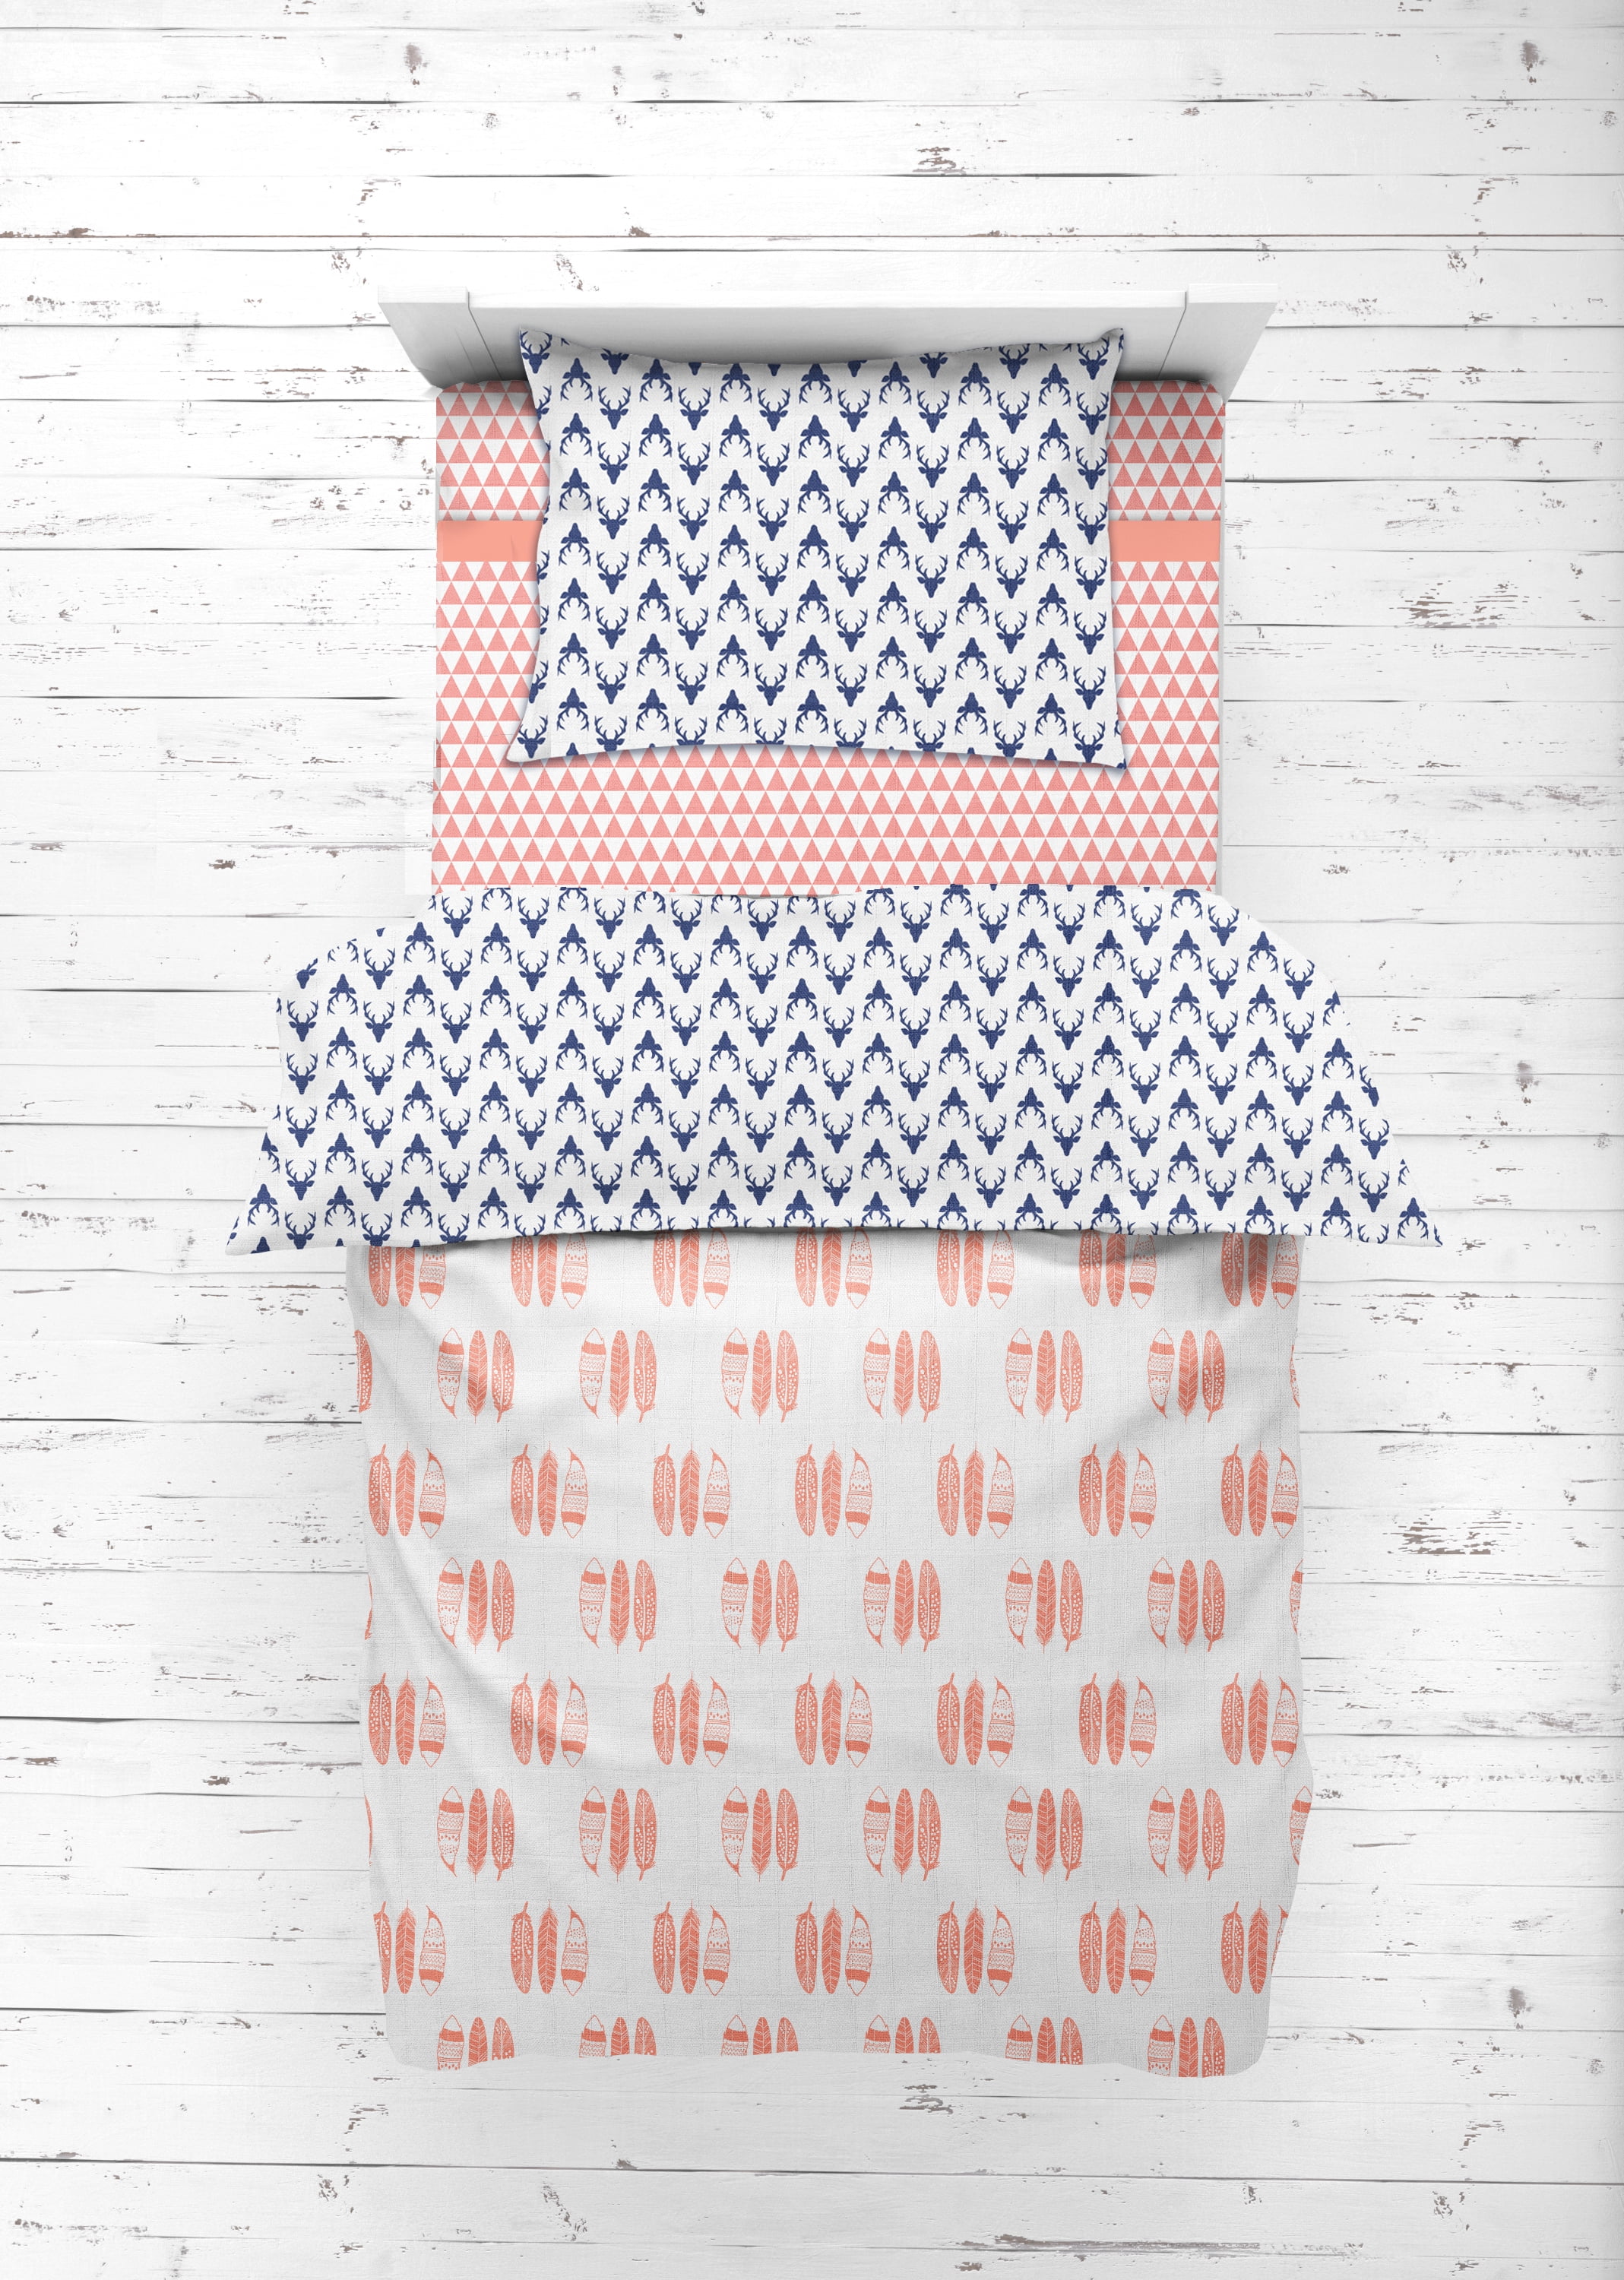 Small Orange/Navy Bacati Aztec/Tribal Triangles 3 Piece Cotton Breathable Muslin Toddler Bedding Sheet Set 